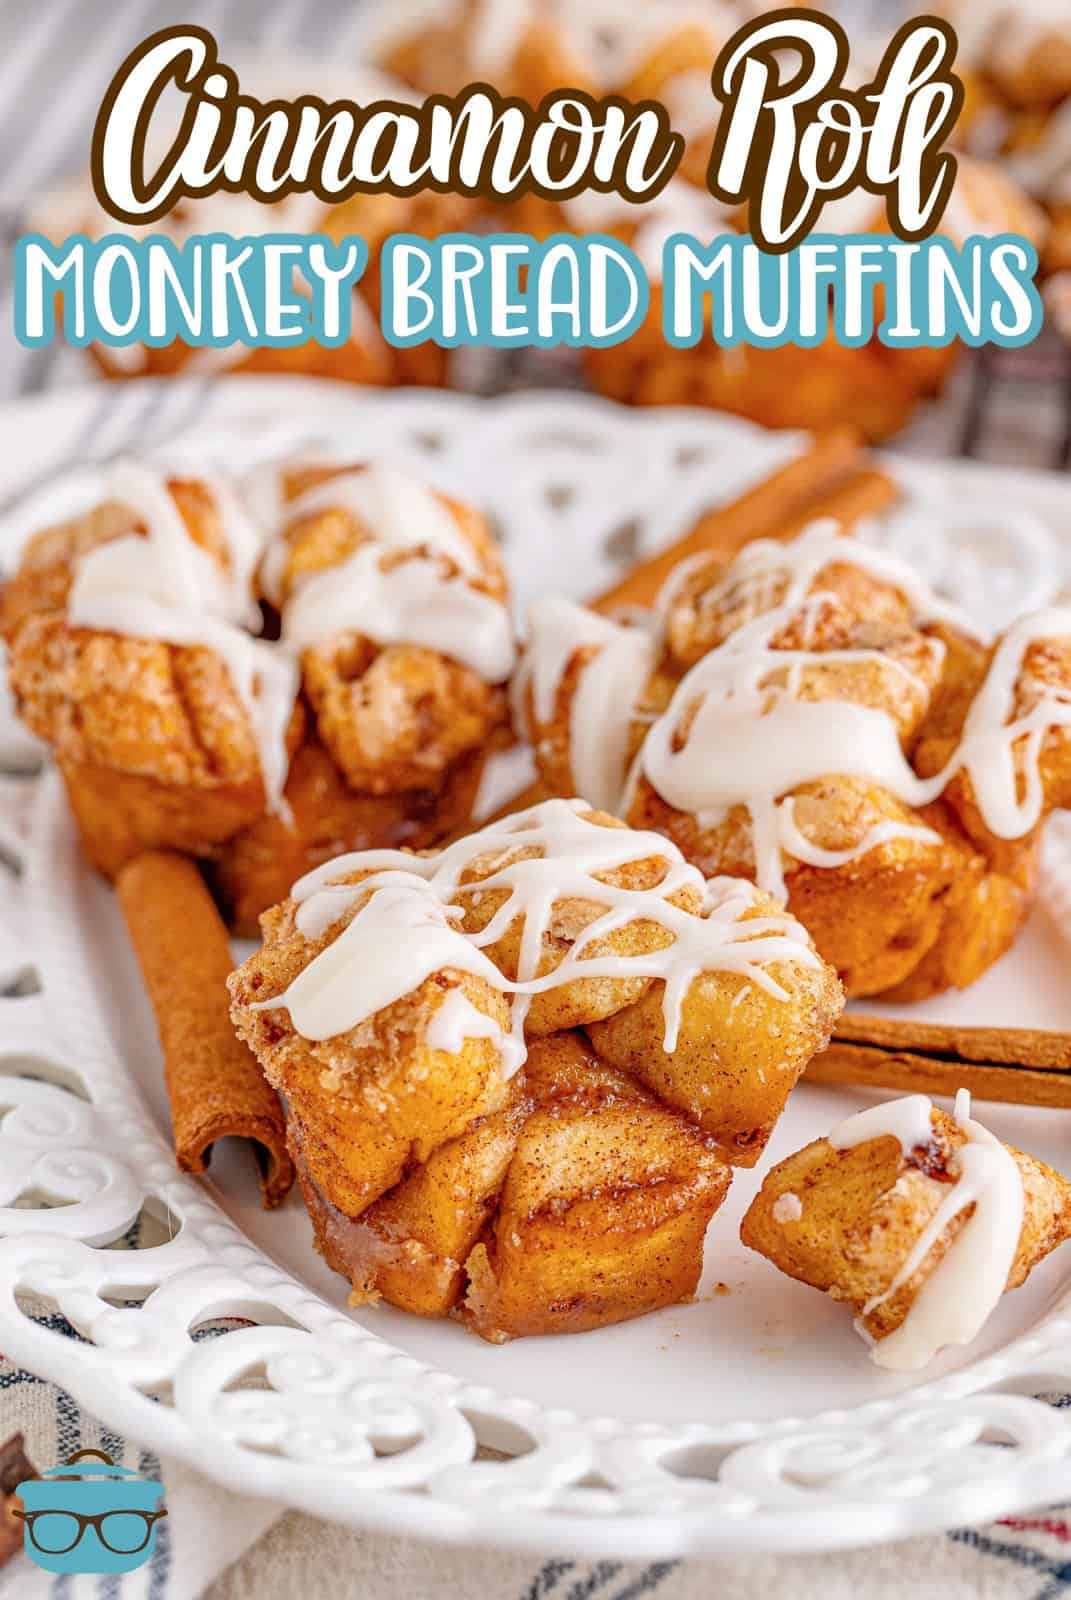 Pinterest image of Cinnamon Roll Monkey Bread Muffins on white plate with bite removed covered in glaze.